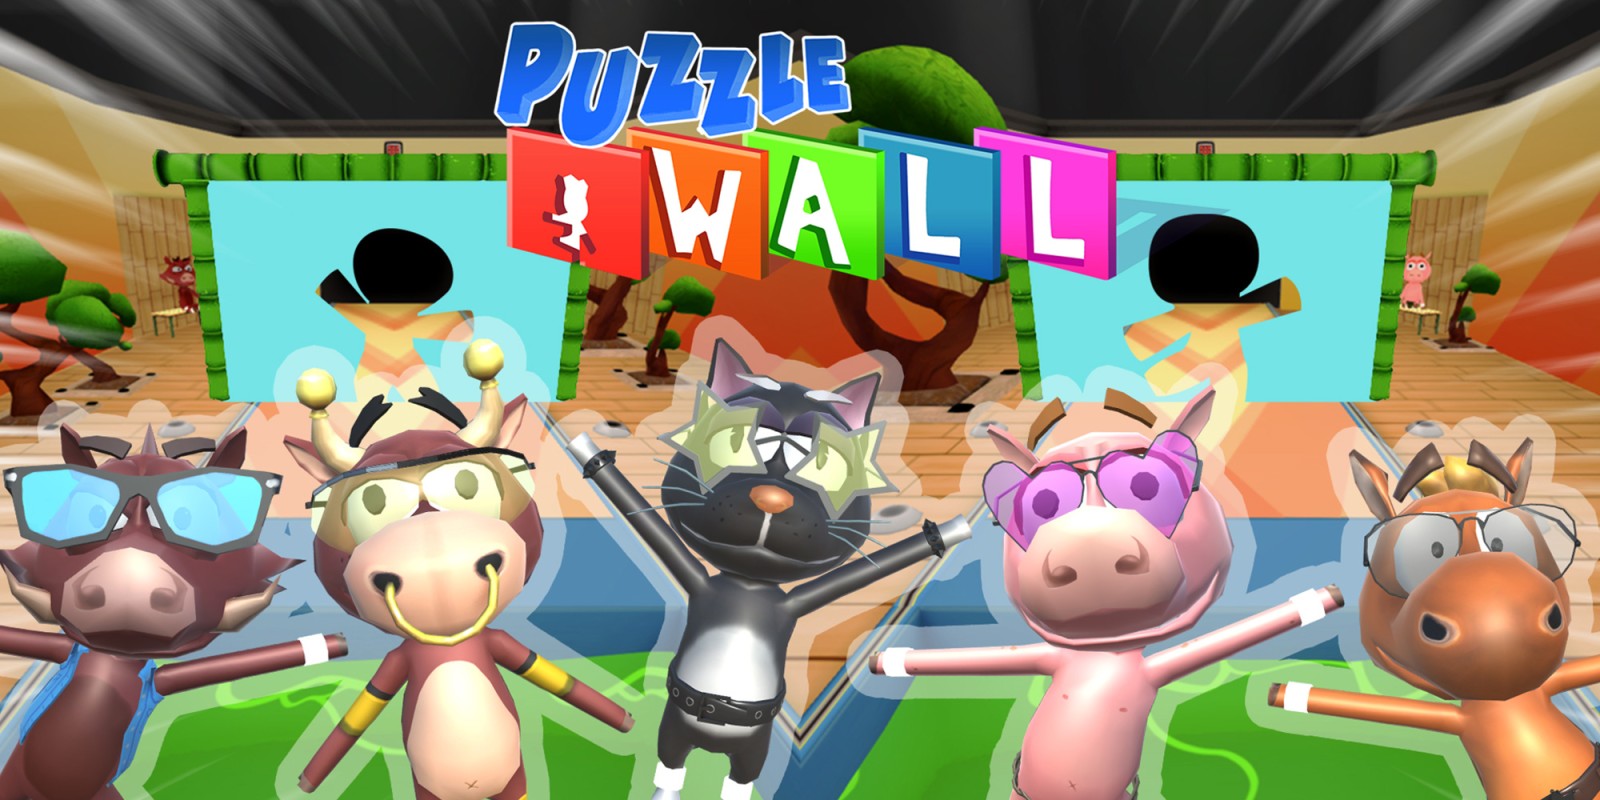 Puzzle Wall